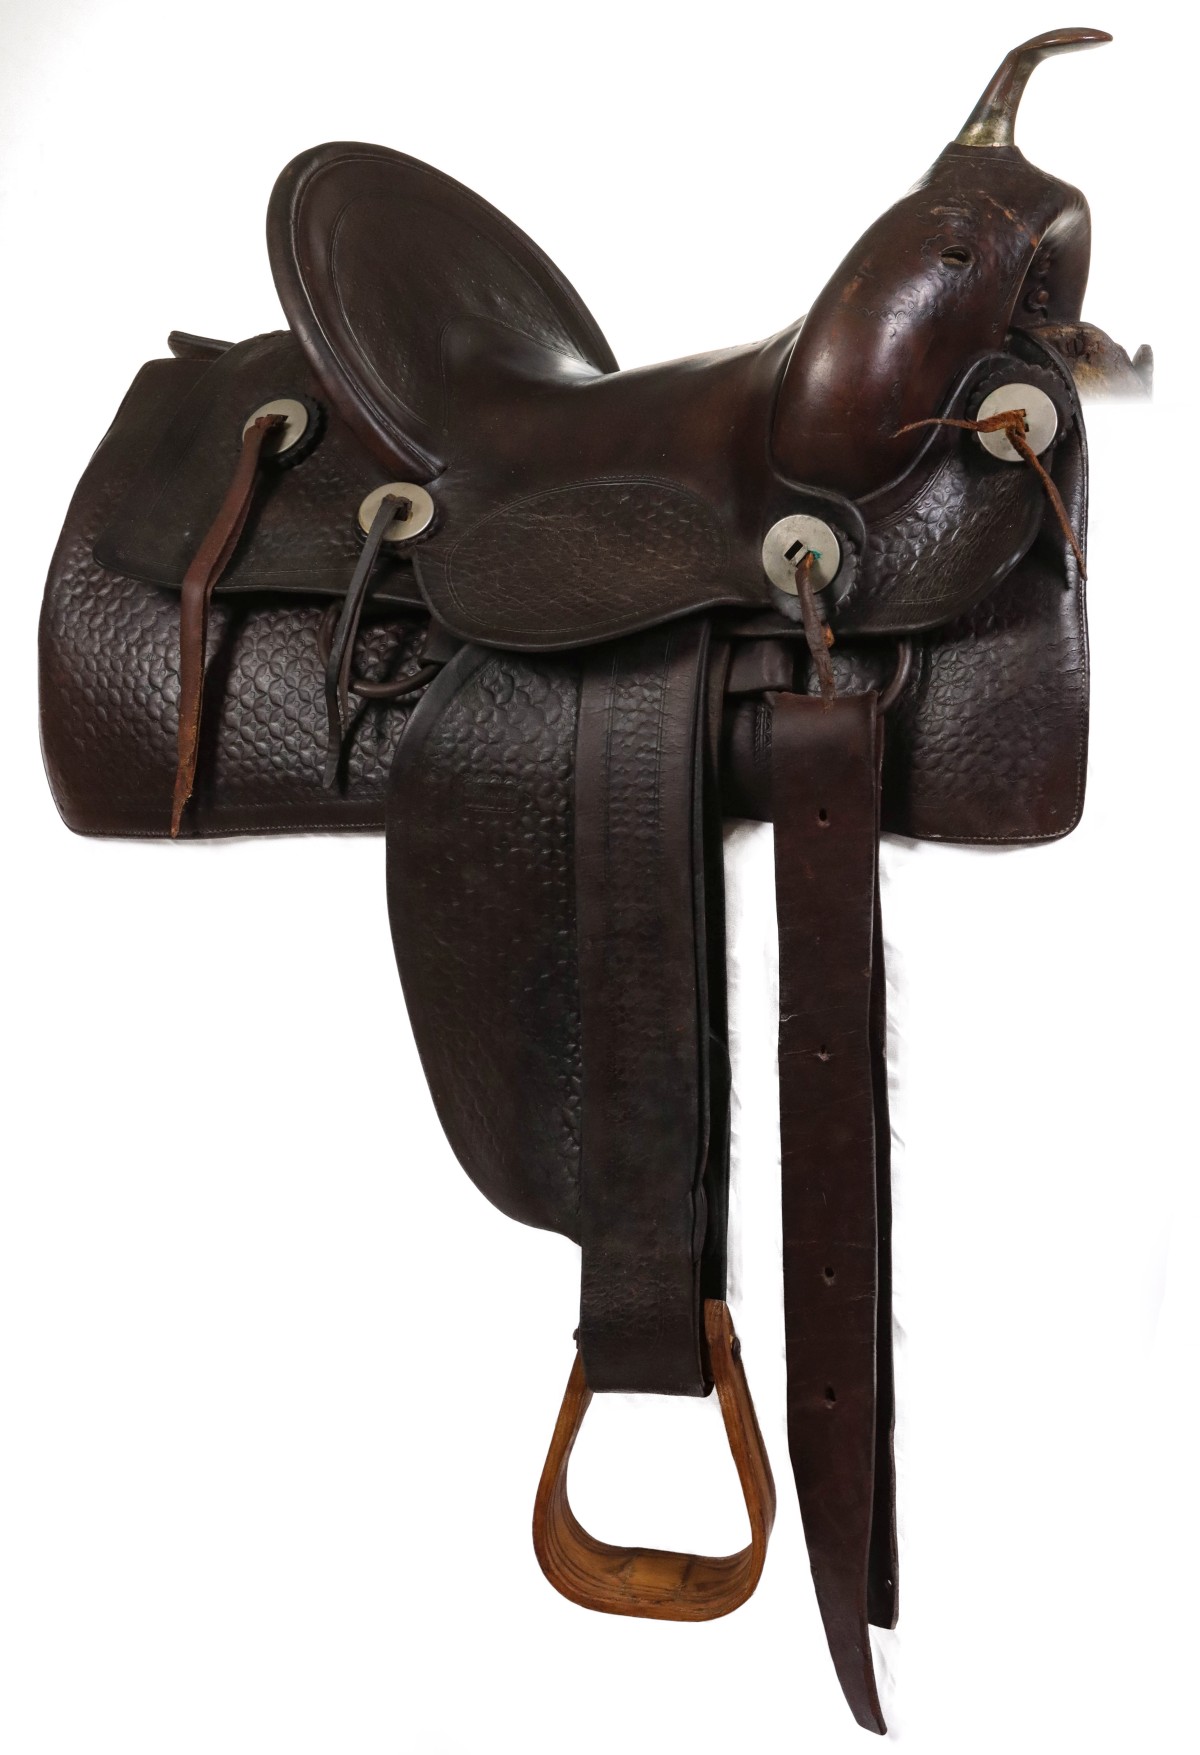 AN EARLY CHARLES P. SHIPLEY HIGH BACK YOUTH SADDLE